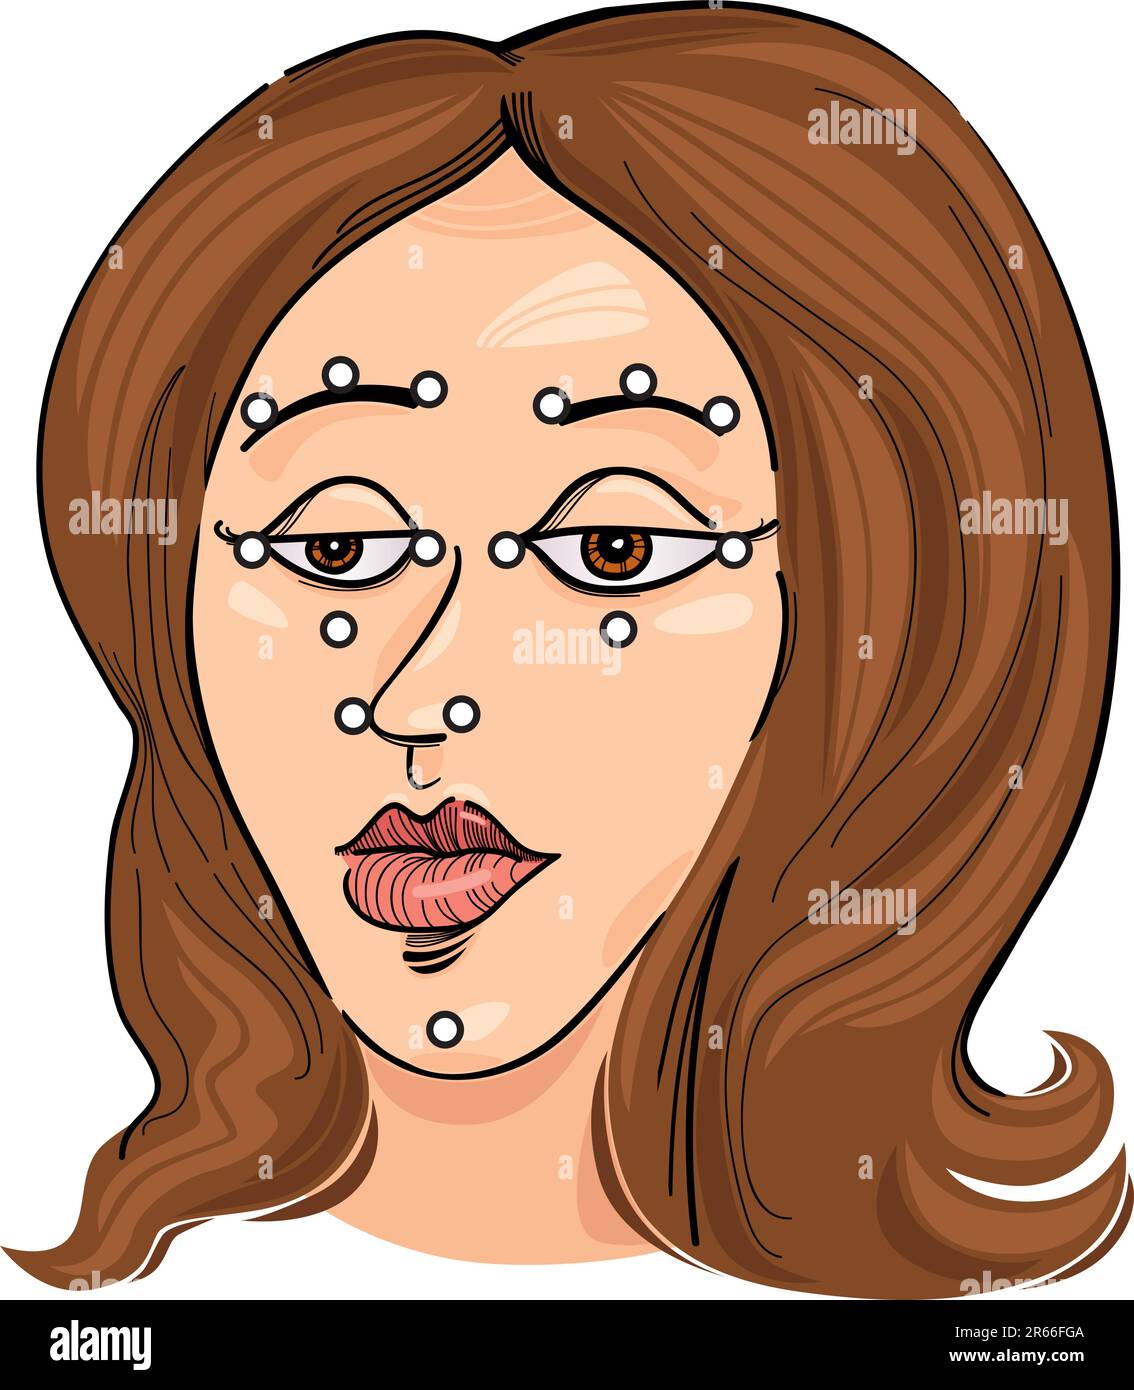 Illustration of acupressure points on face Stock Vector